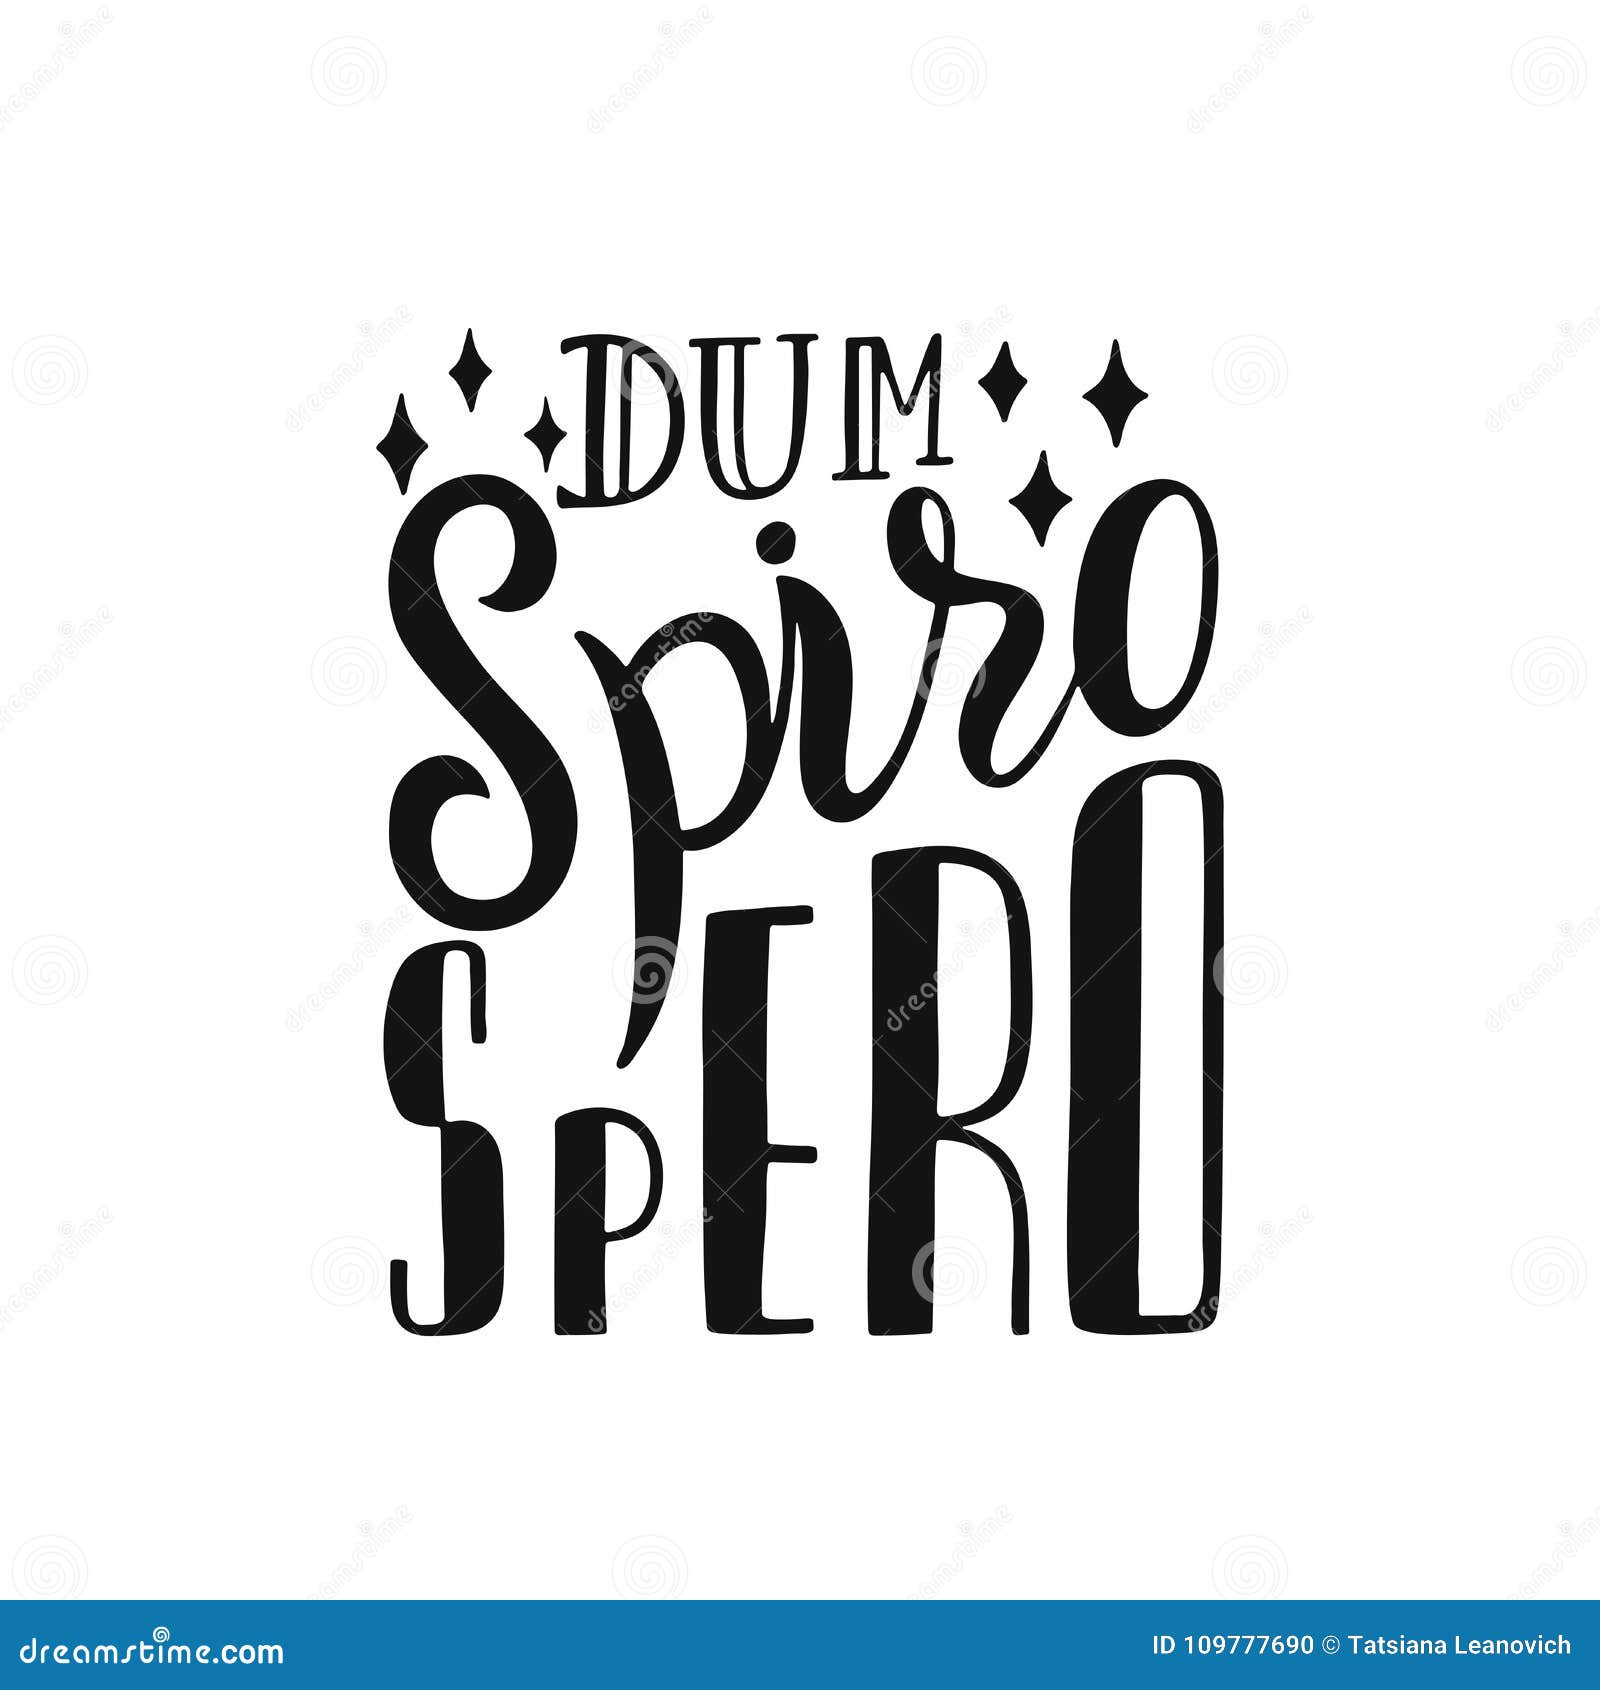 dum spiro spero - latin phrase means while i breath, i hope. hand drawn inspirational  quote for prints, posters, t-shirts.